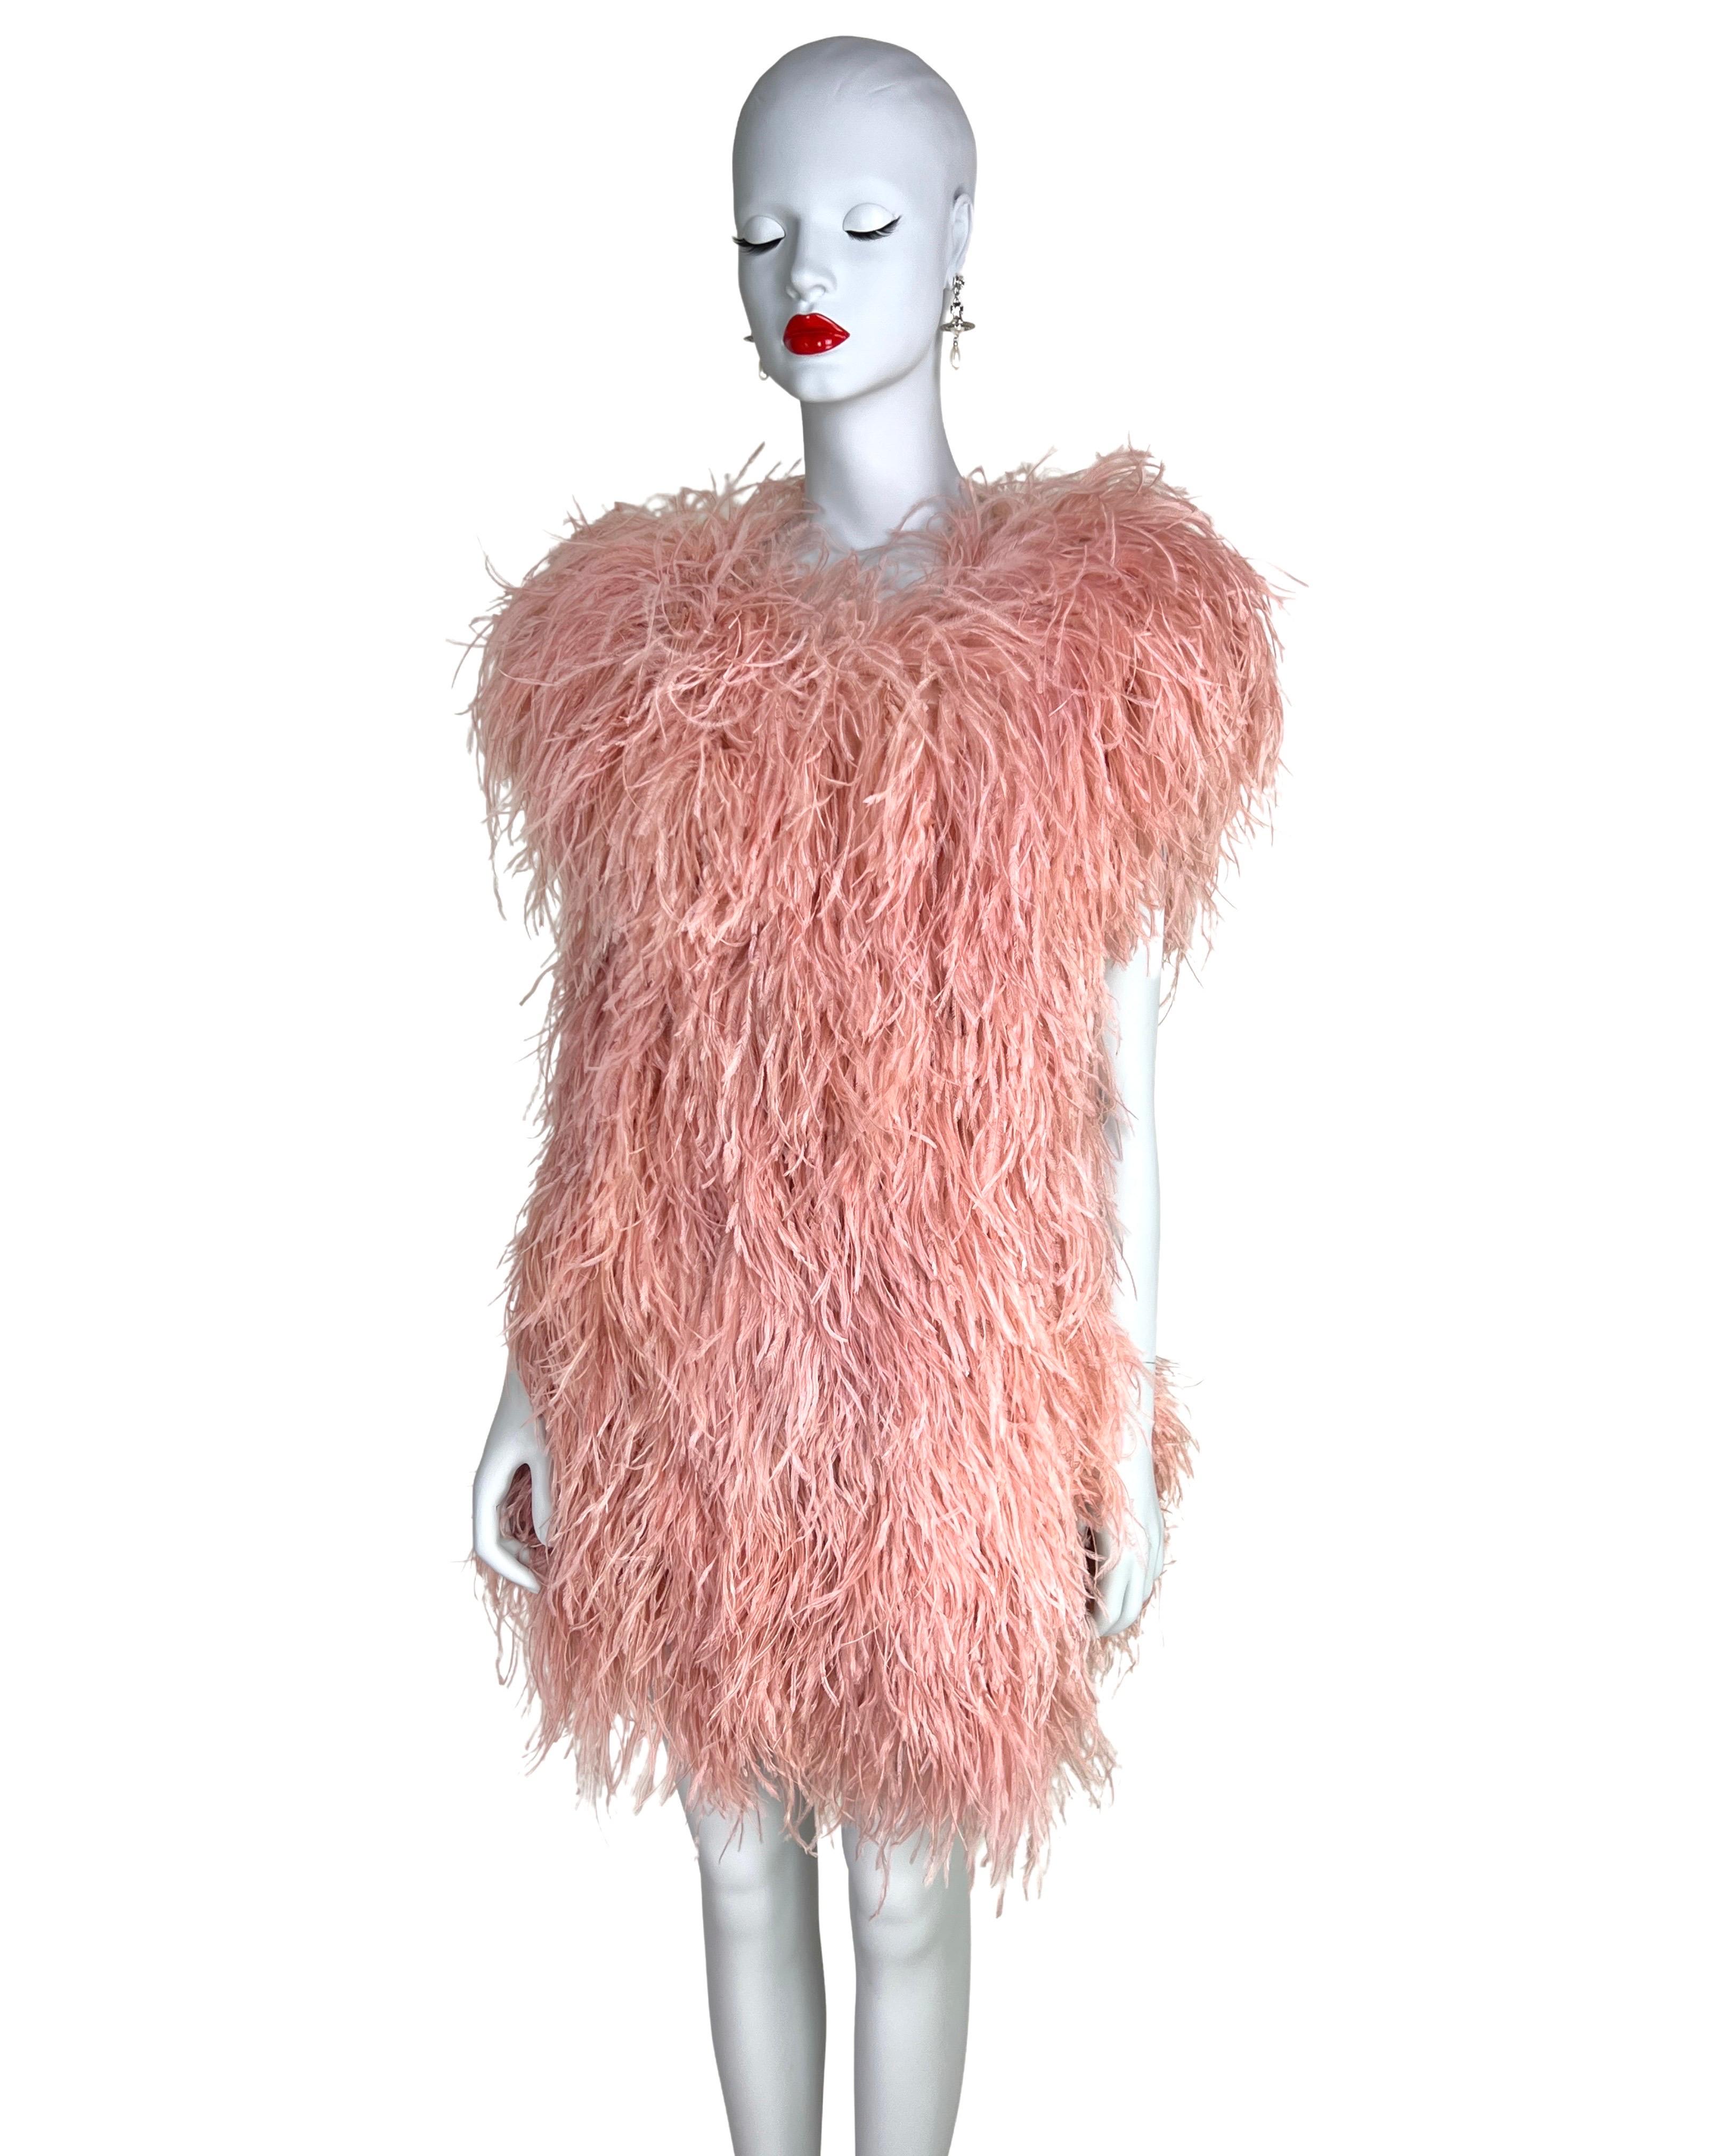 Sonia Rykiel Fall 2010 Ostrich Feather Dress In Excellent Condition For Sale In Prague, CZ